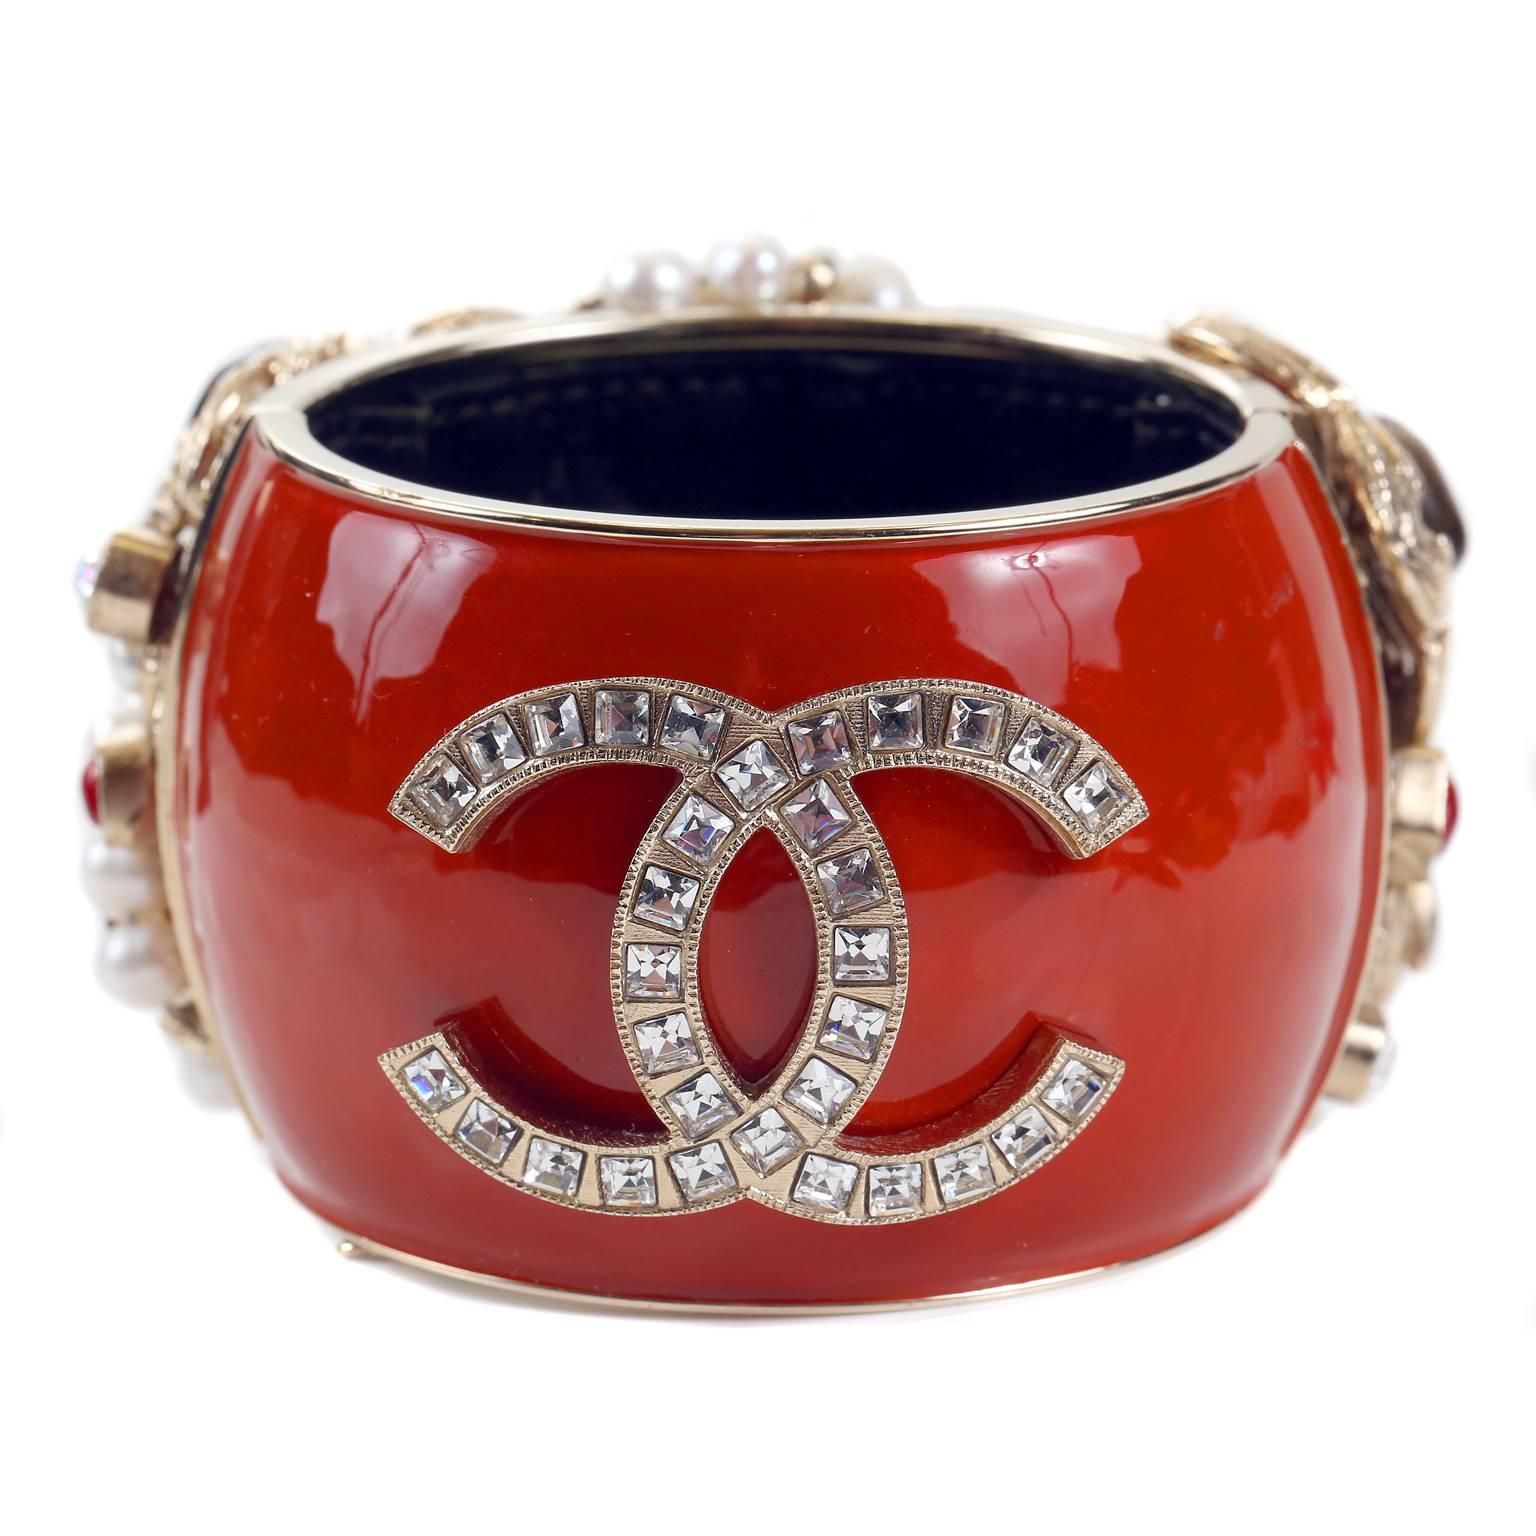 This authentic Chanel Jewel Encrusted Byzantine Collection Bangle Bracelet is pristine.  One of perhaps three in existence, this stunning bracelet is highly collectible.  
Rust colored enamel bangle is covered in pearls, gem stones and icons on one